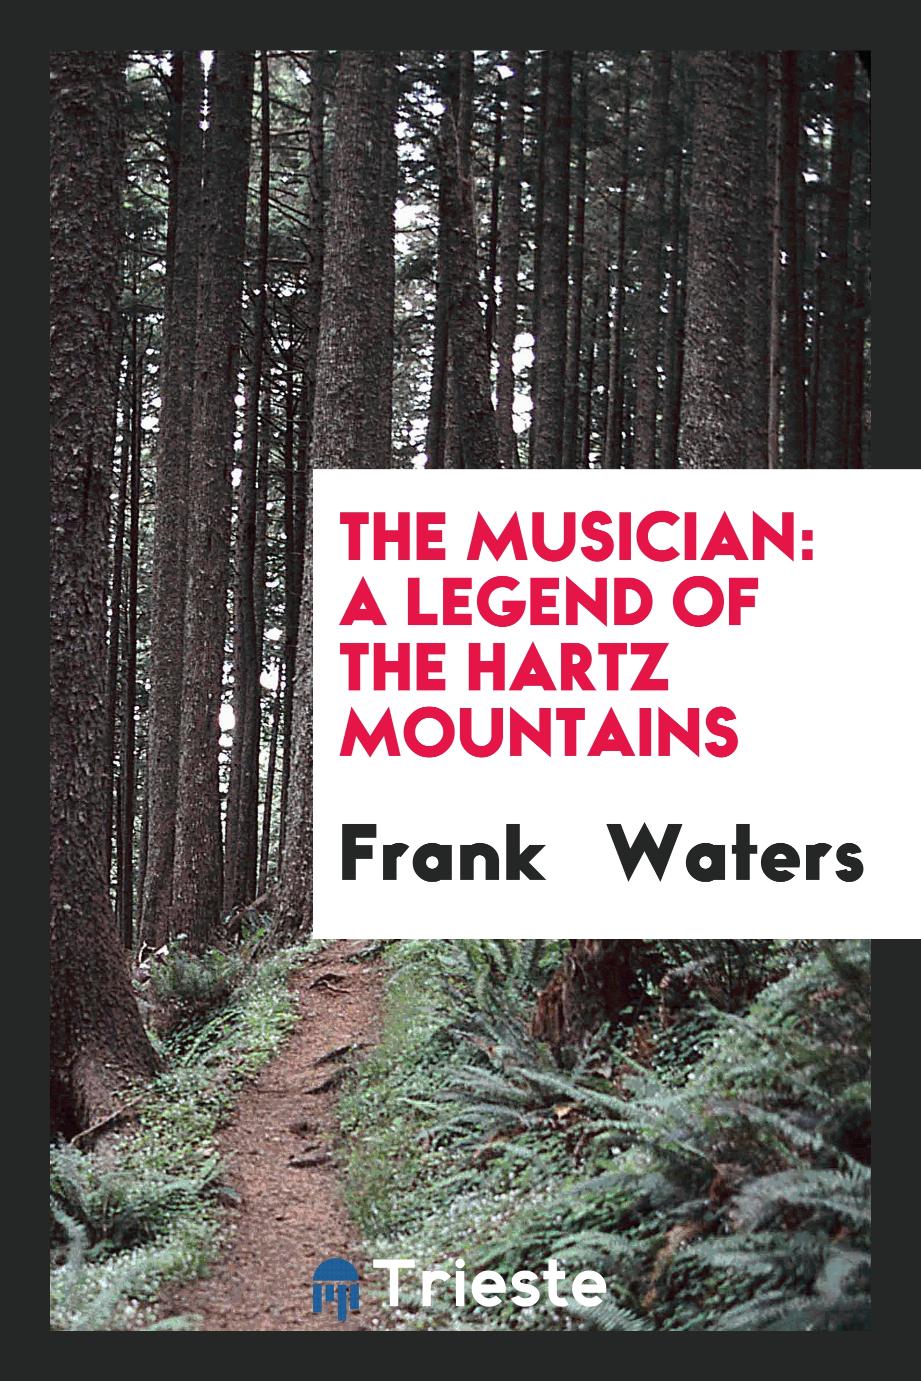 The Musician: A Legend of the Hartz Mountains